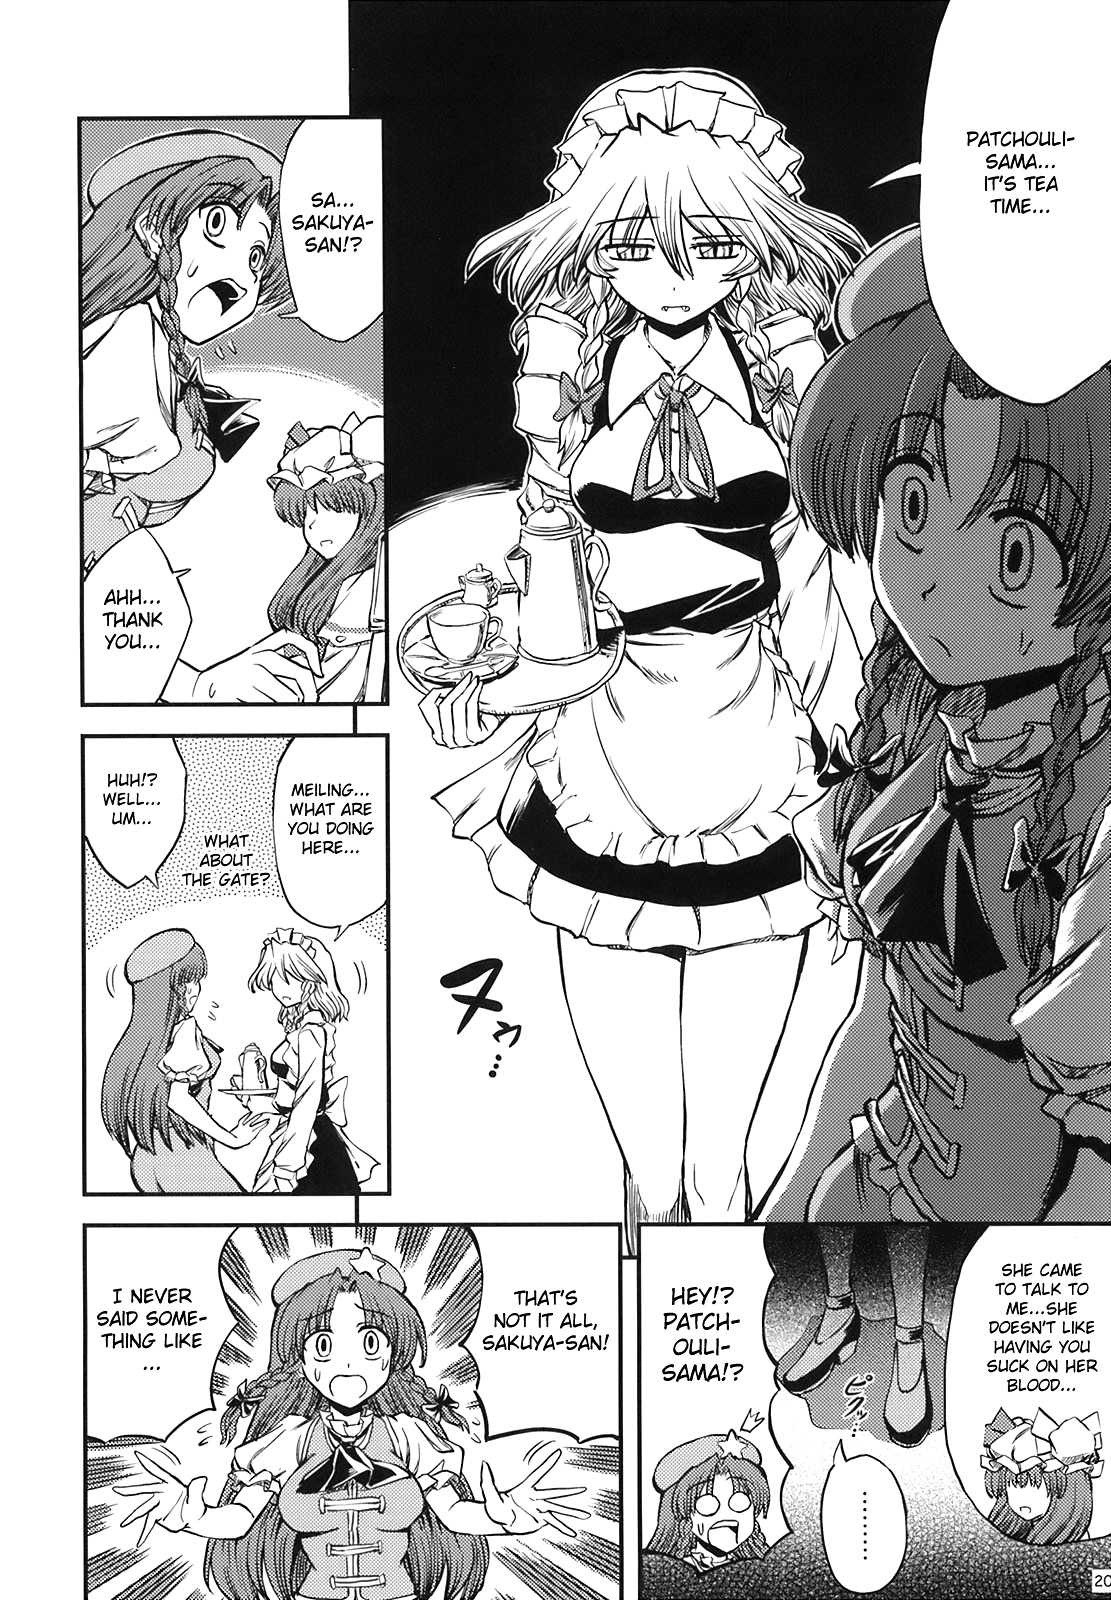 [Visionnerz] Maid and the Bloody Clock of Fate -Lunatic- (Touhou) [ENG] 